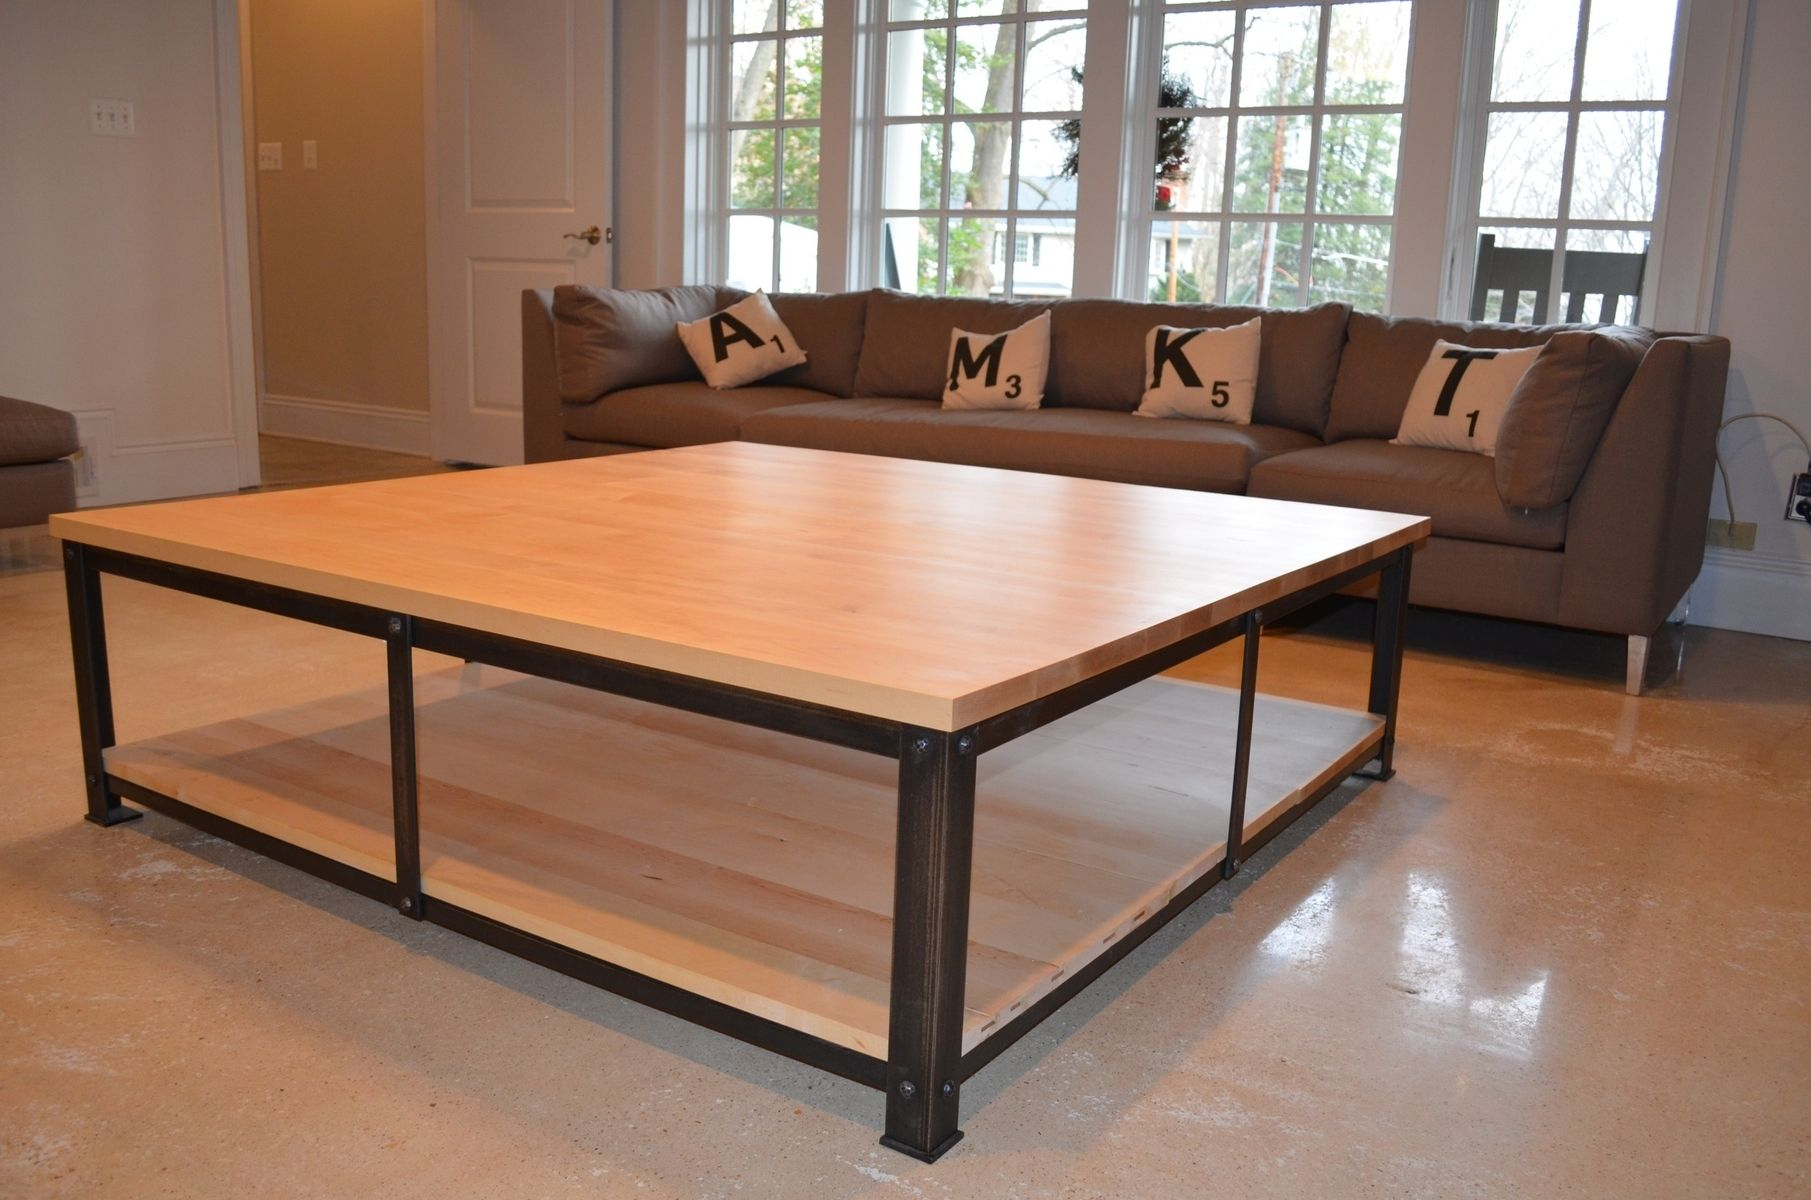 60 Inch Square Coffee Table Hipenmoedernl within sizing 1811 X 1200